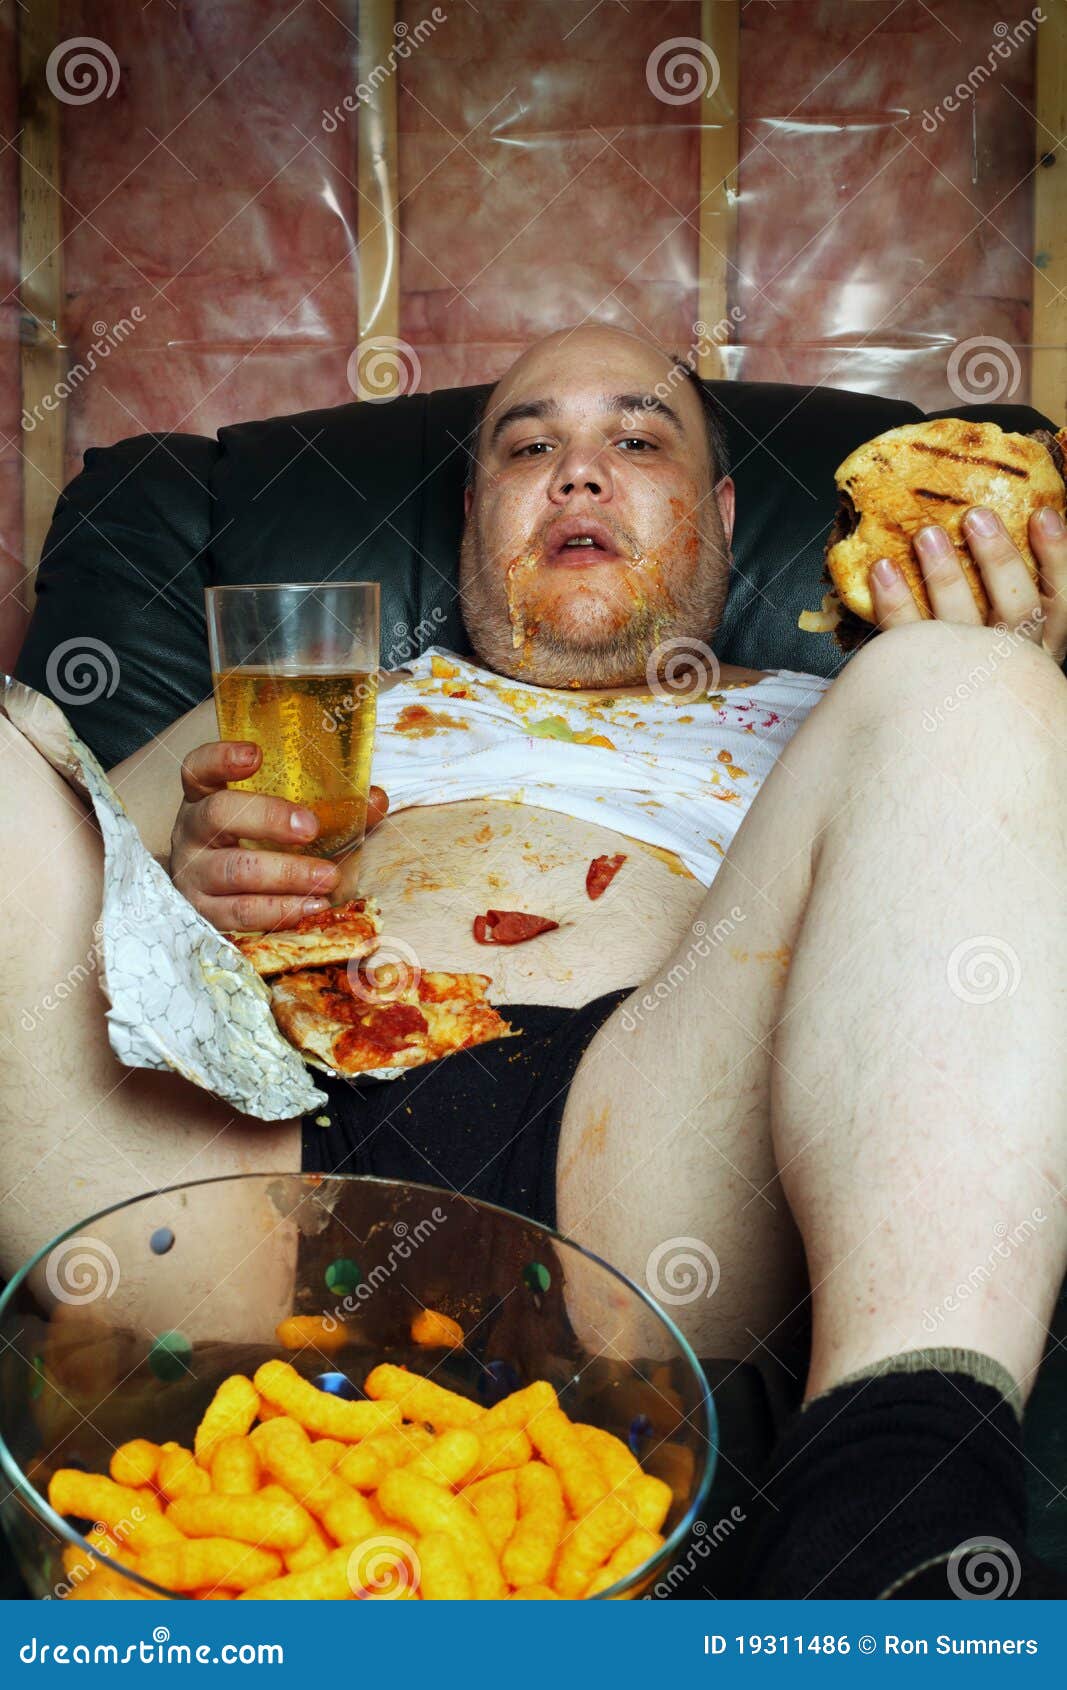 Fat People Eating Like Slobs - 107 Fat Slob Stock Photos - Free & Royalty-Free Stock Photos from Dreamstime